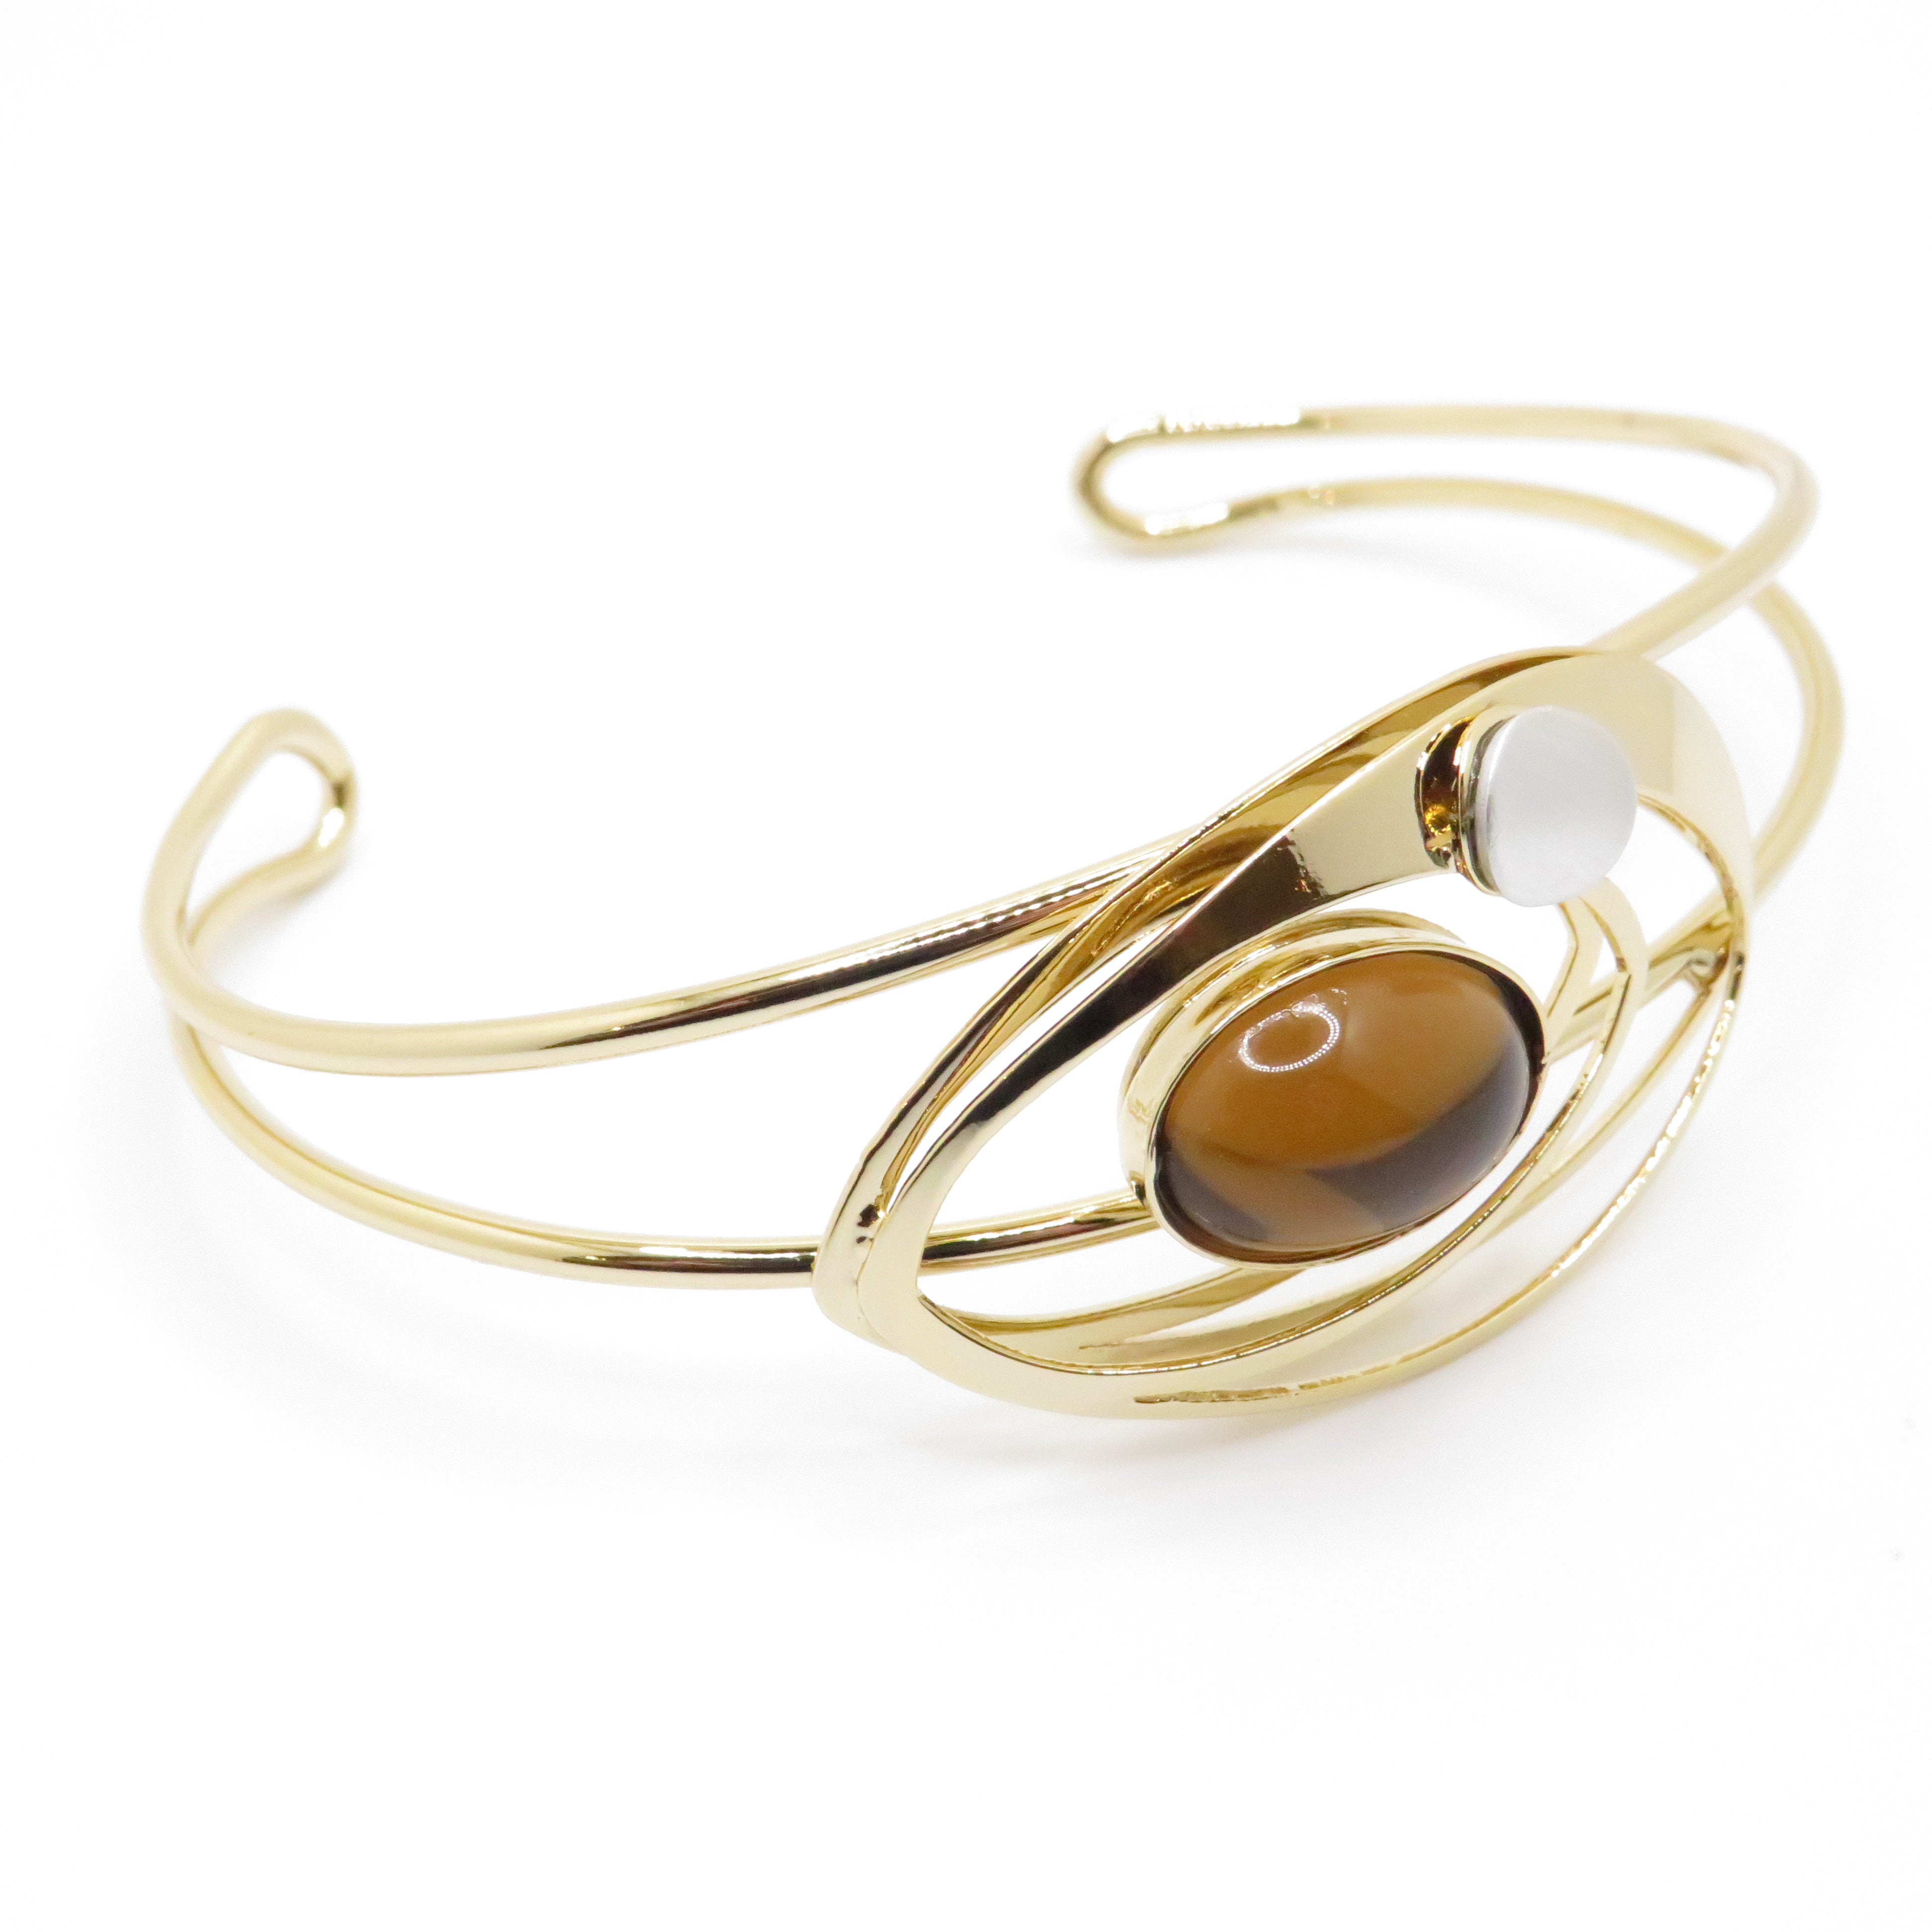 gold cuff bracelet with glass bead